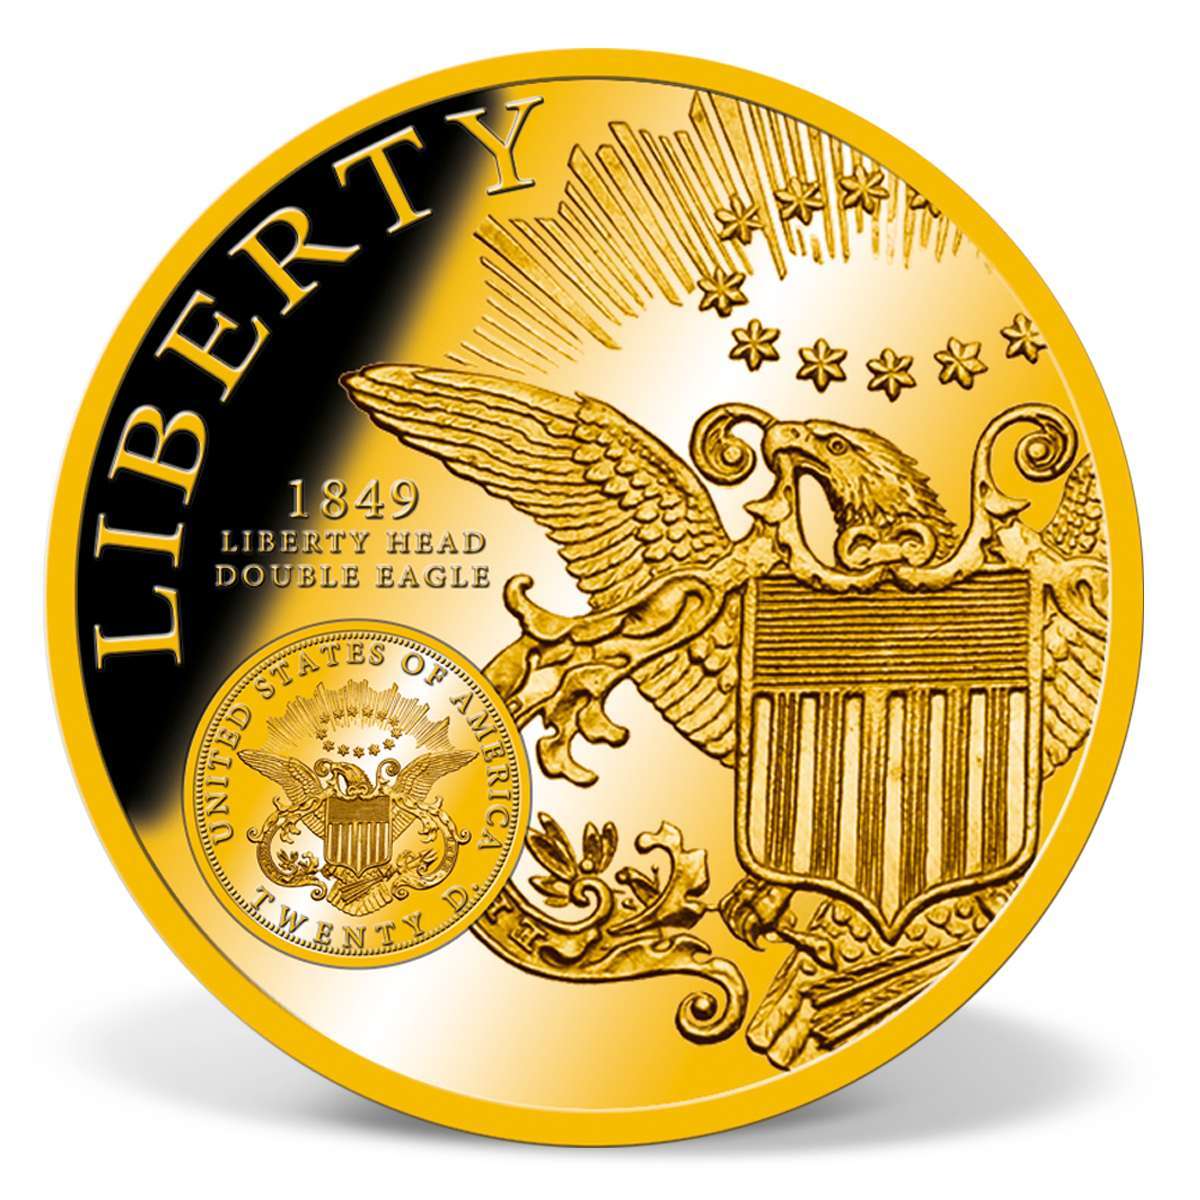 Liberty Double Eagle Gold Commemorative Coin American Mint